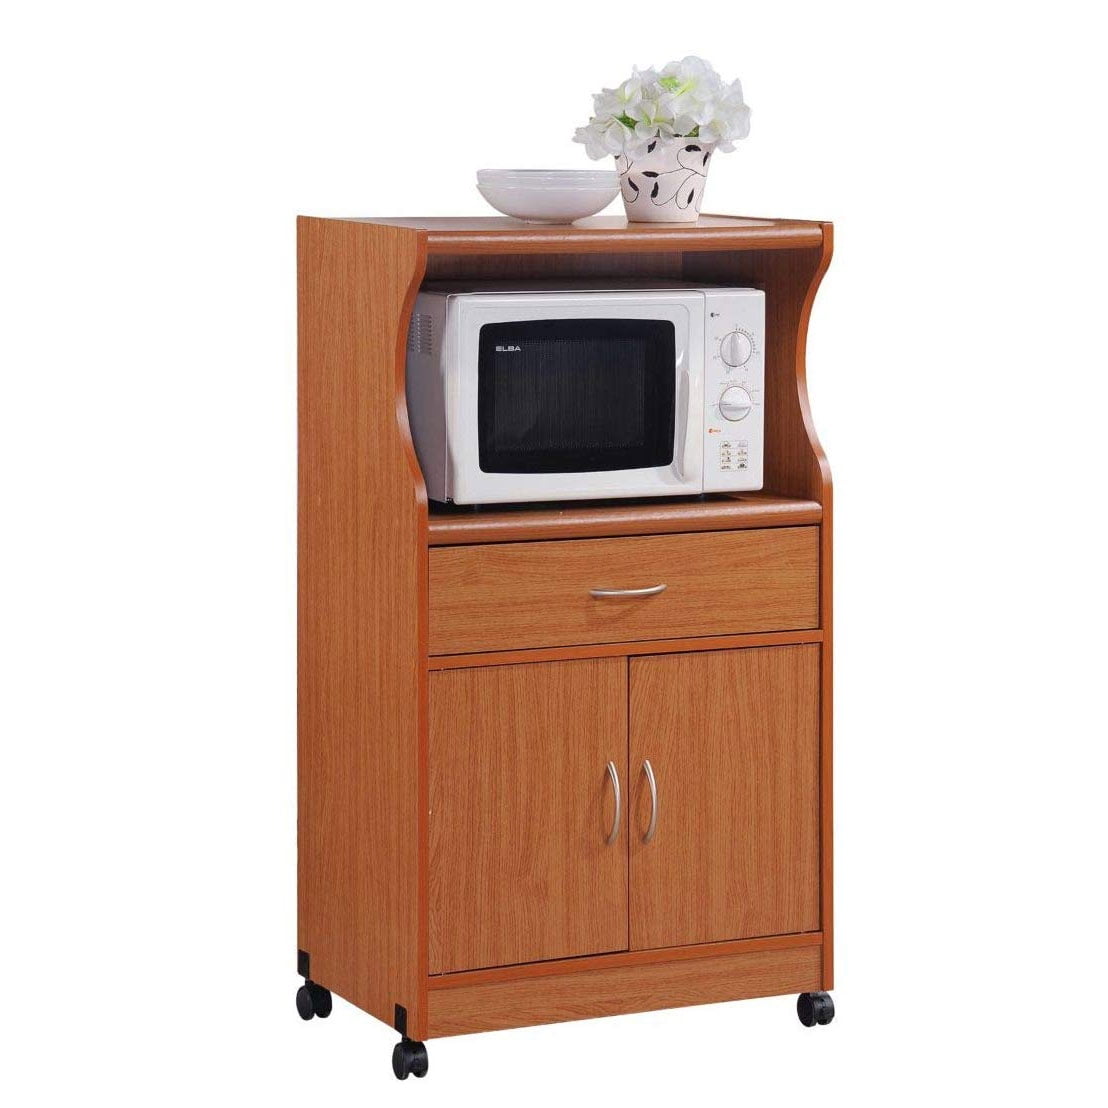 Hodedah Wheeled Kitchen Microwave Cart with Drawer and Cabinet Storage